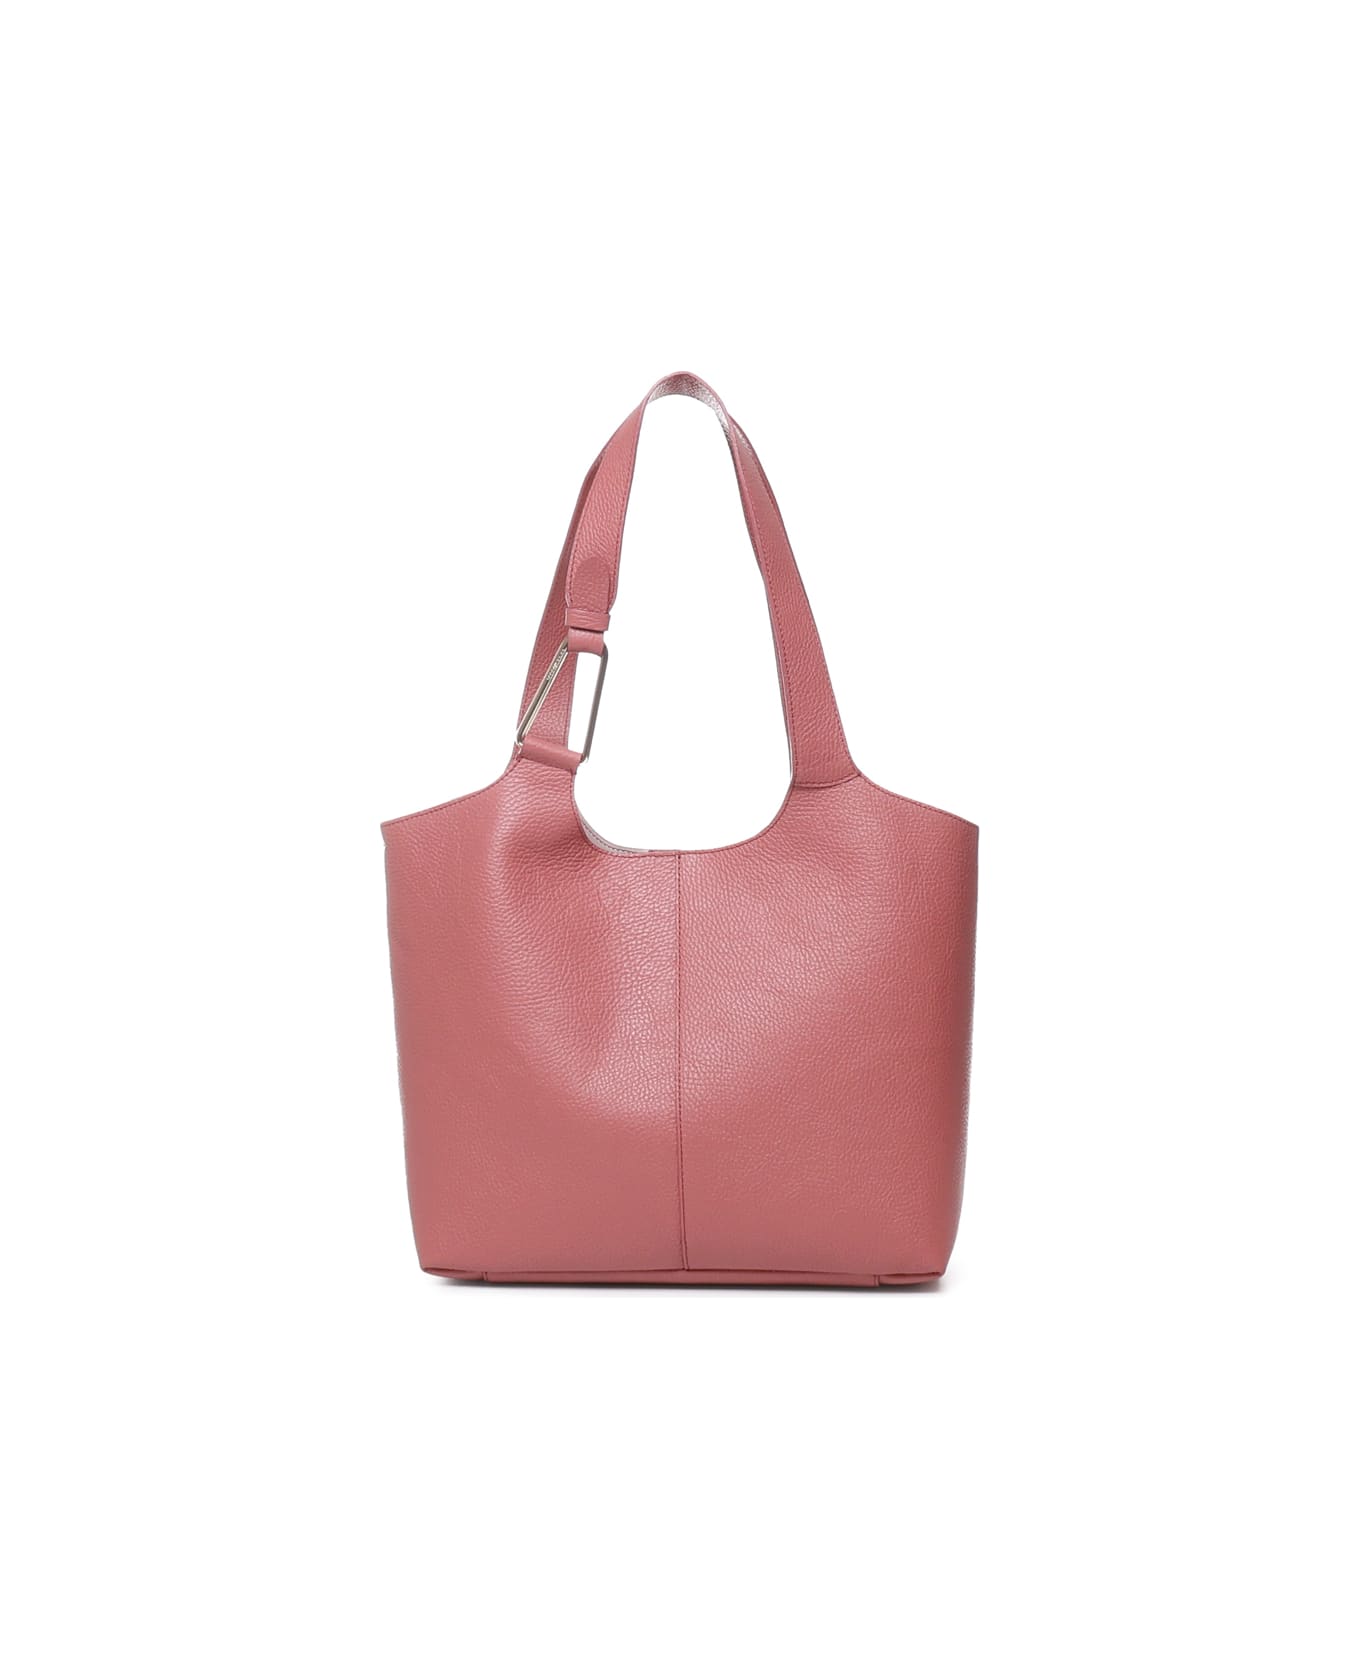 Coccinelle Leather Shopping Bag - Pink